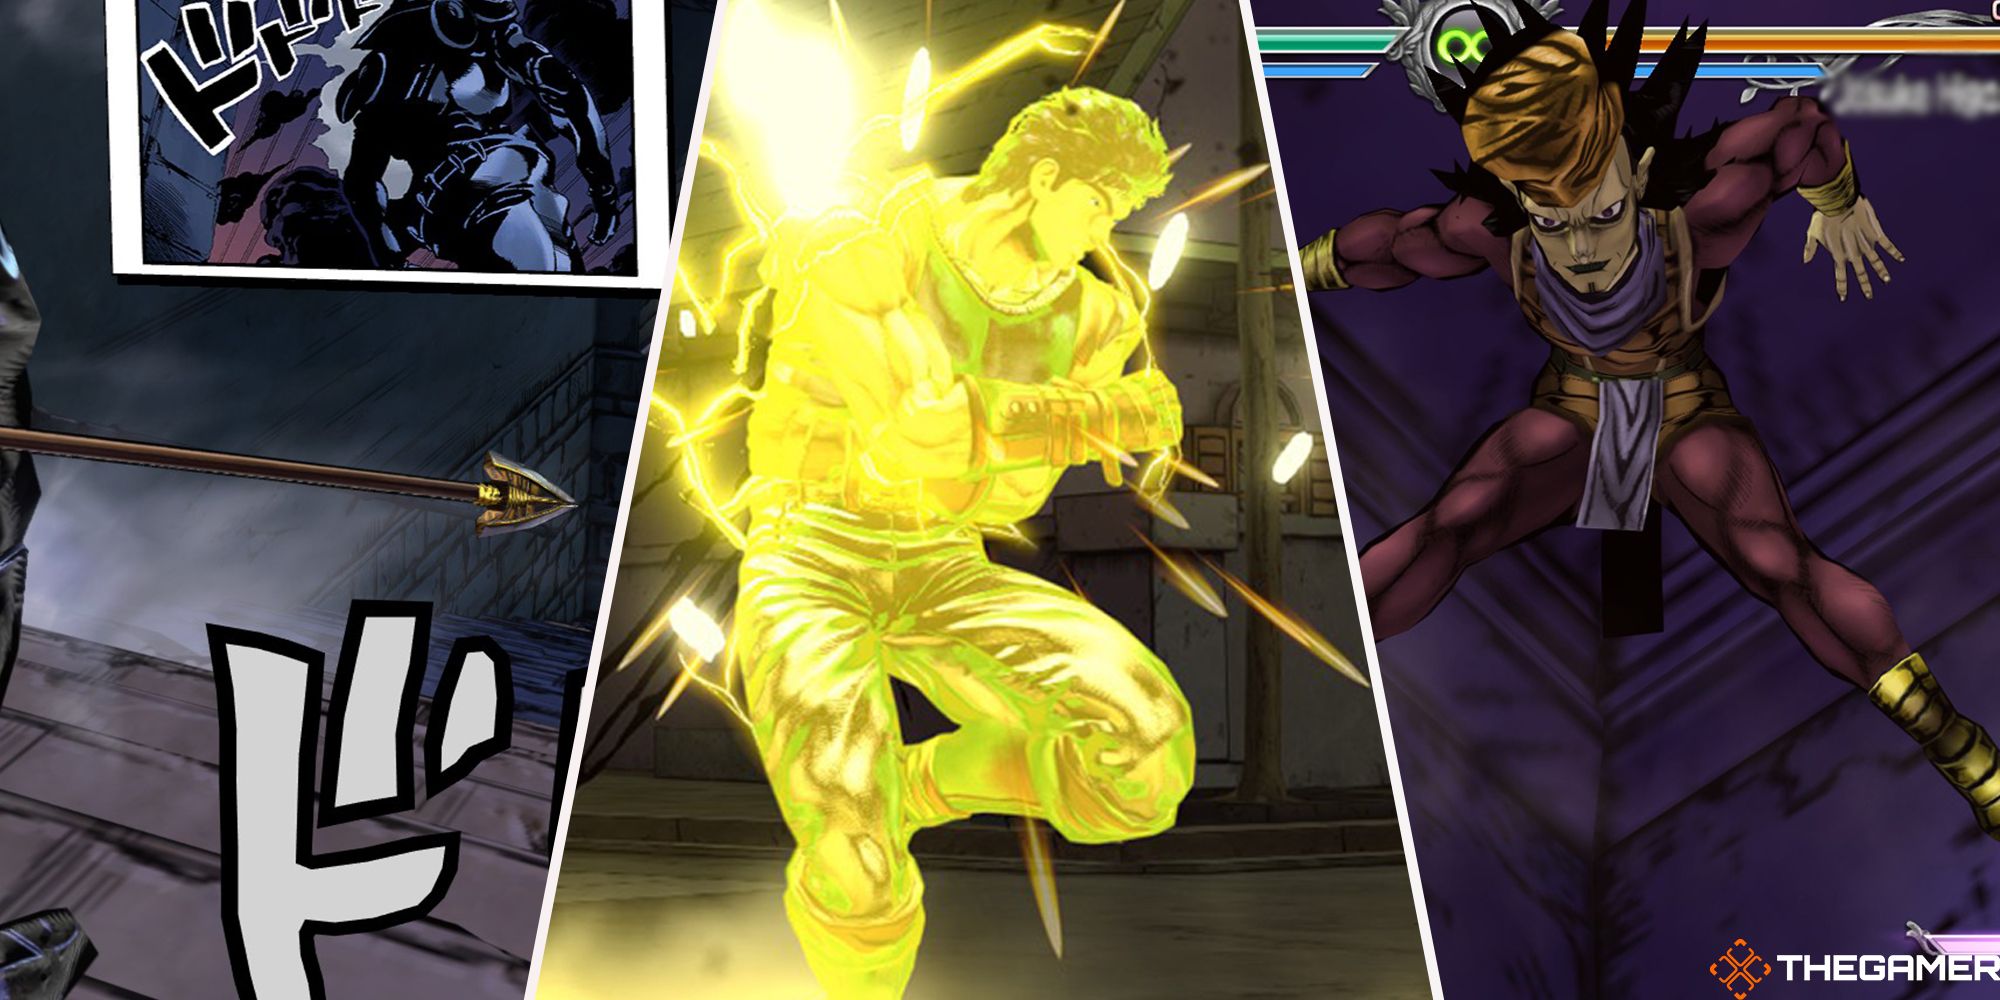 Three panels feature various arena gimmicks, including a statue come to life, lightning strikes, and a vampiric henchman, from JoJo's Bizarre Adventure ASBR.